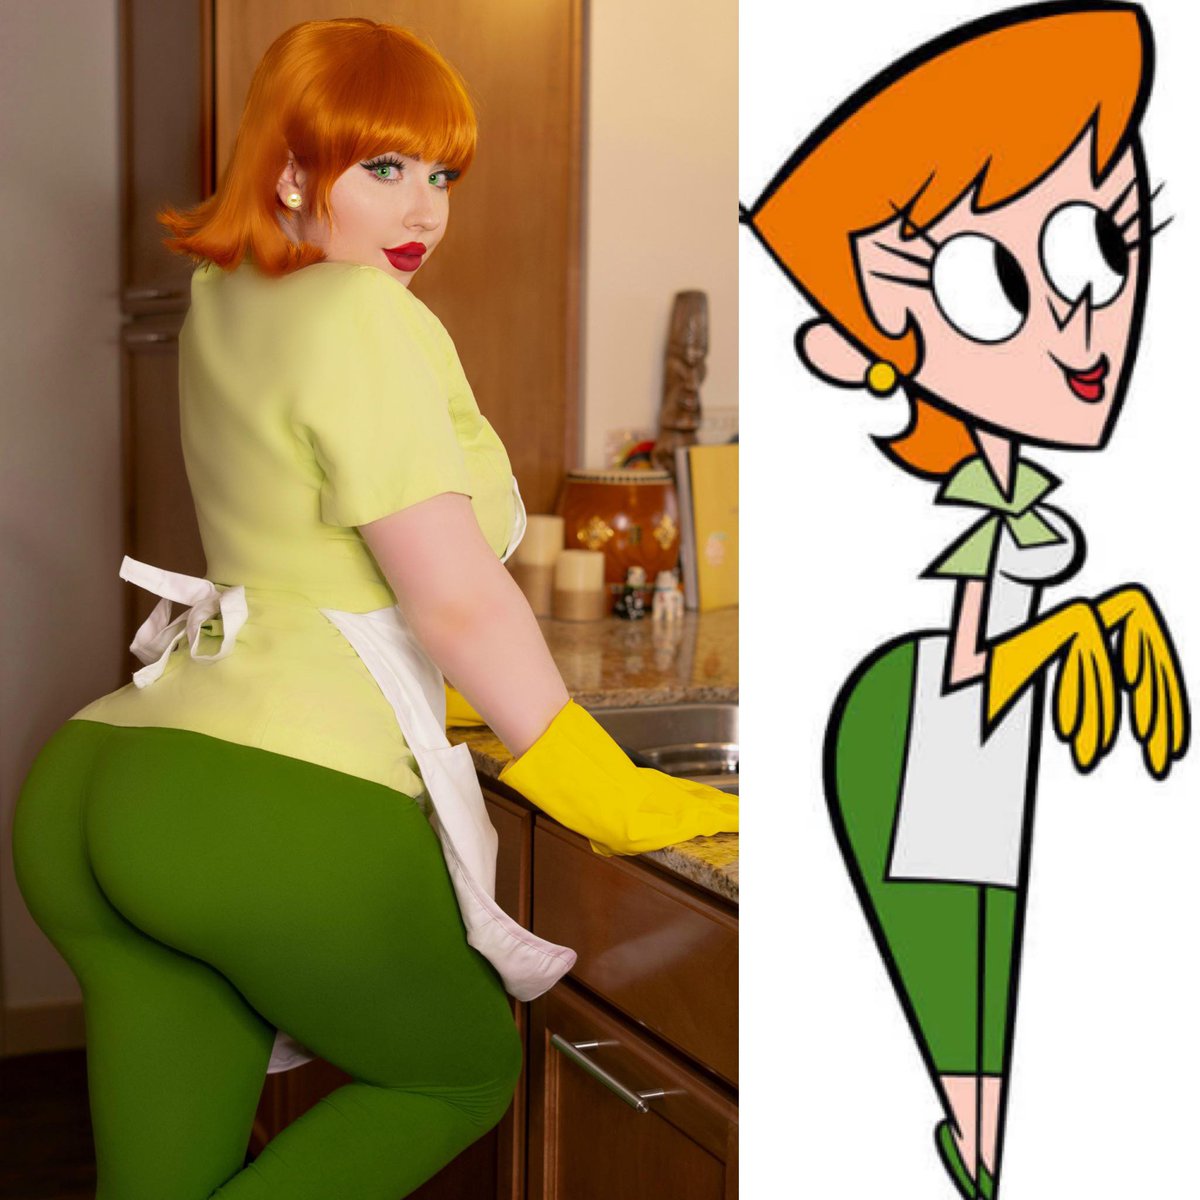 Some Cosplay of Cartoon MILFs featuring classic redheads: Lois Griffin and ...